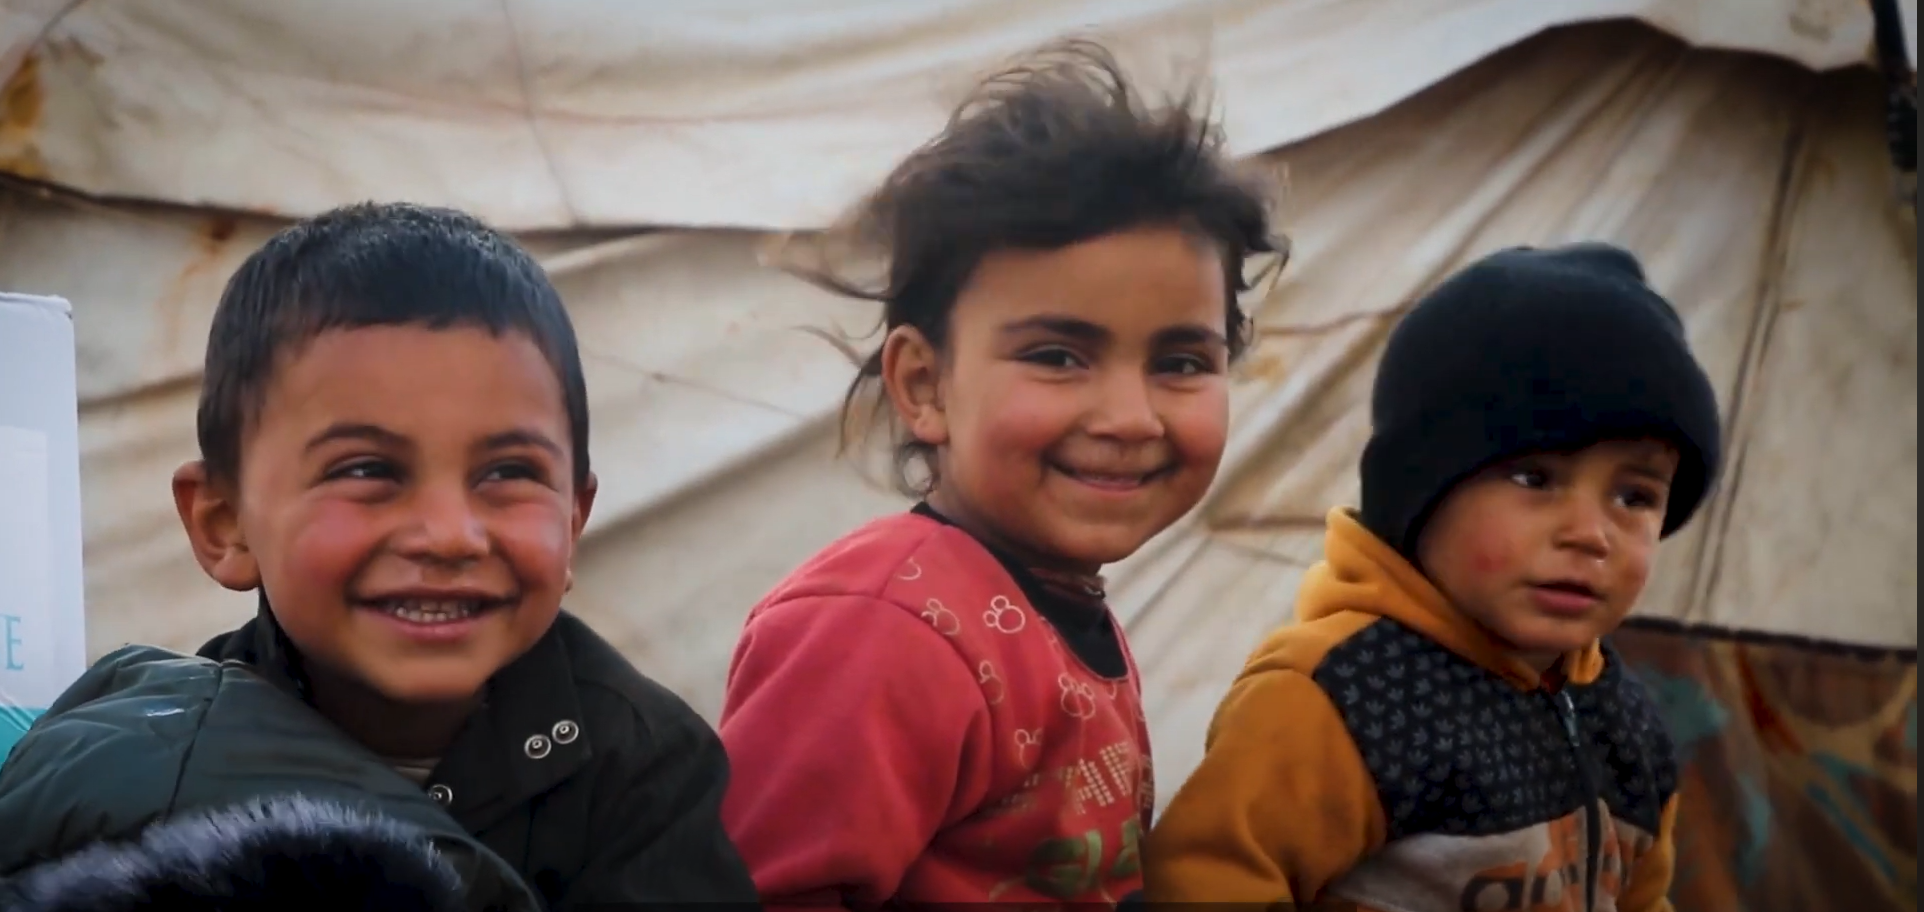 Three children next to a UN-style white tent. They are smiling and brightly clothed.